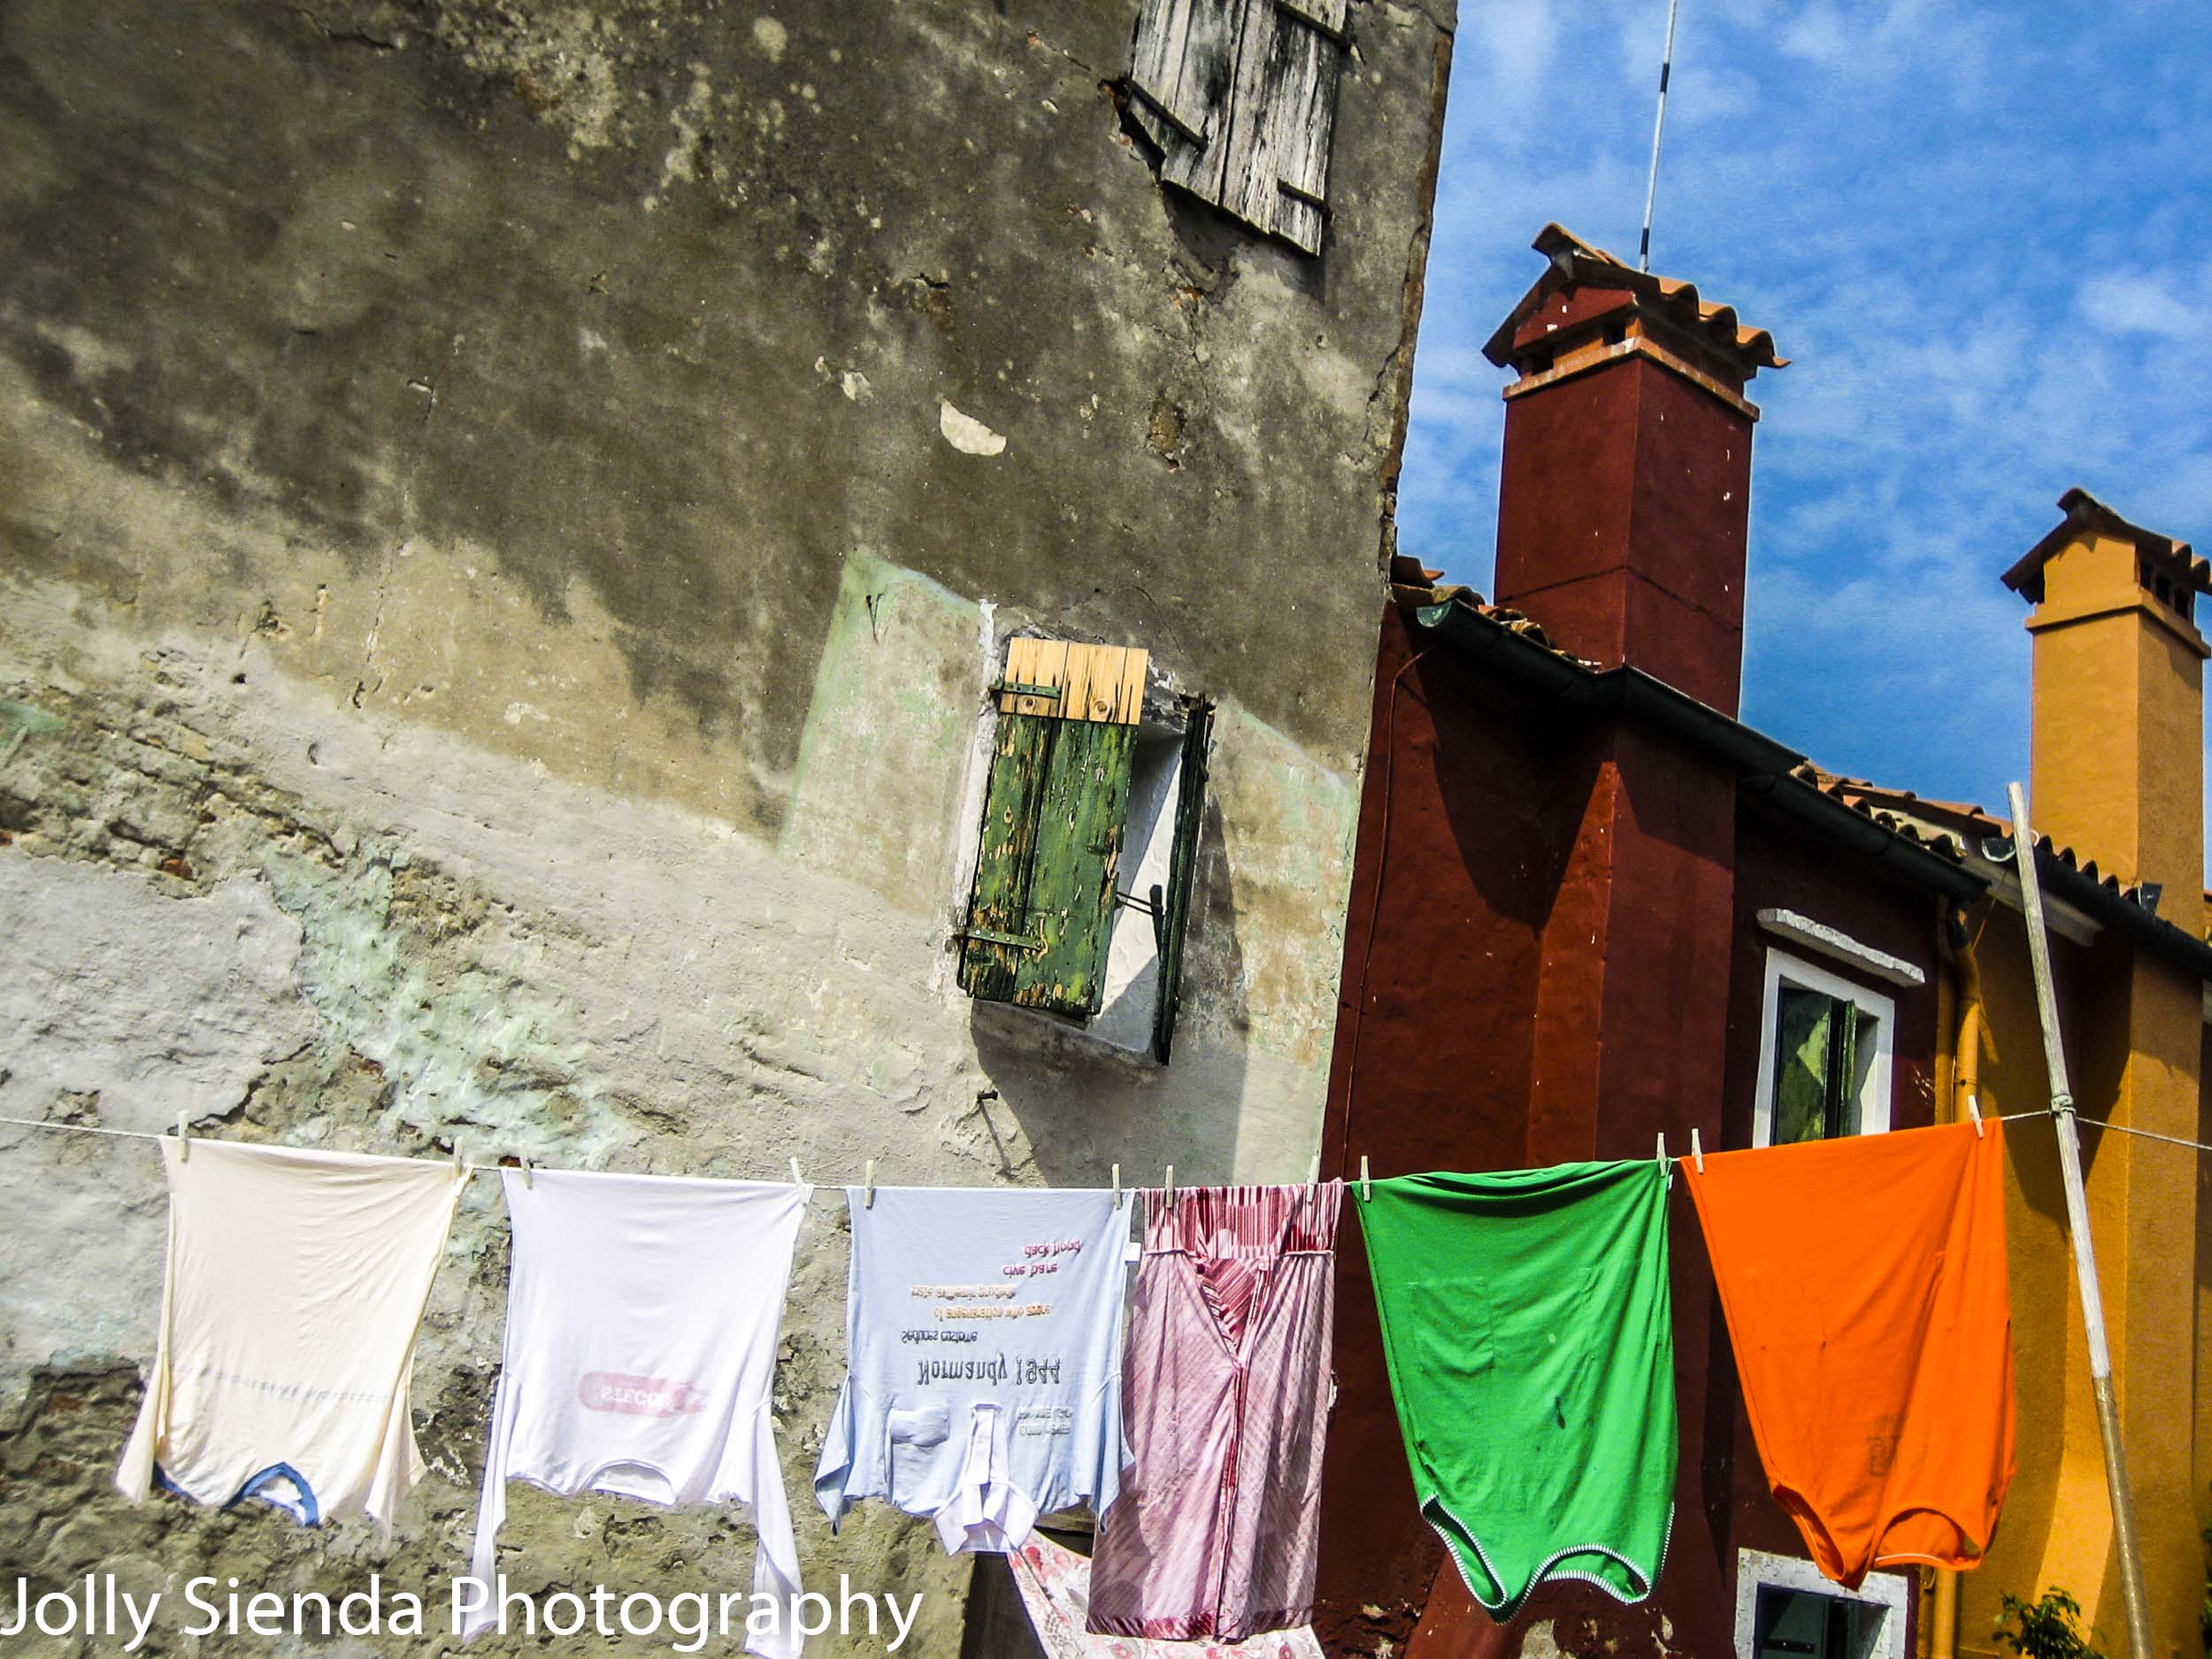 Laundry Hangs on a Clothes Line between Painted Buildings